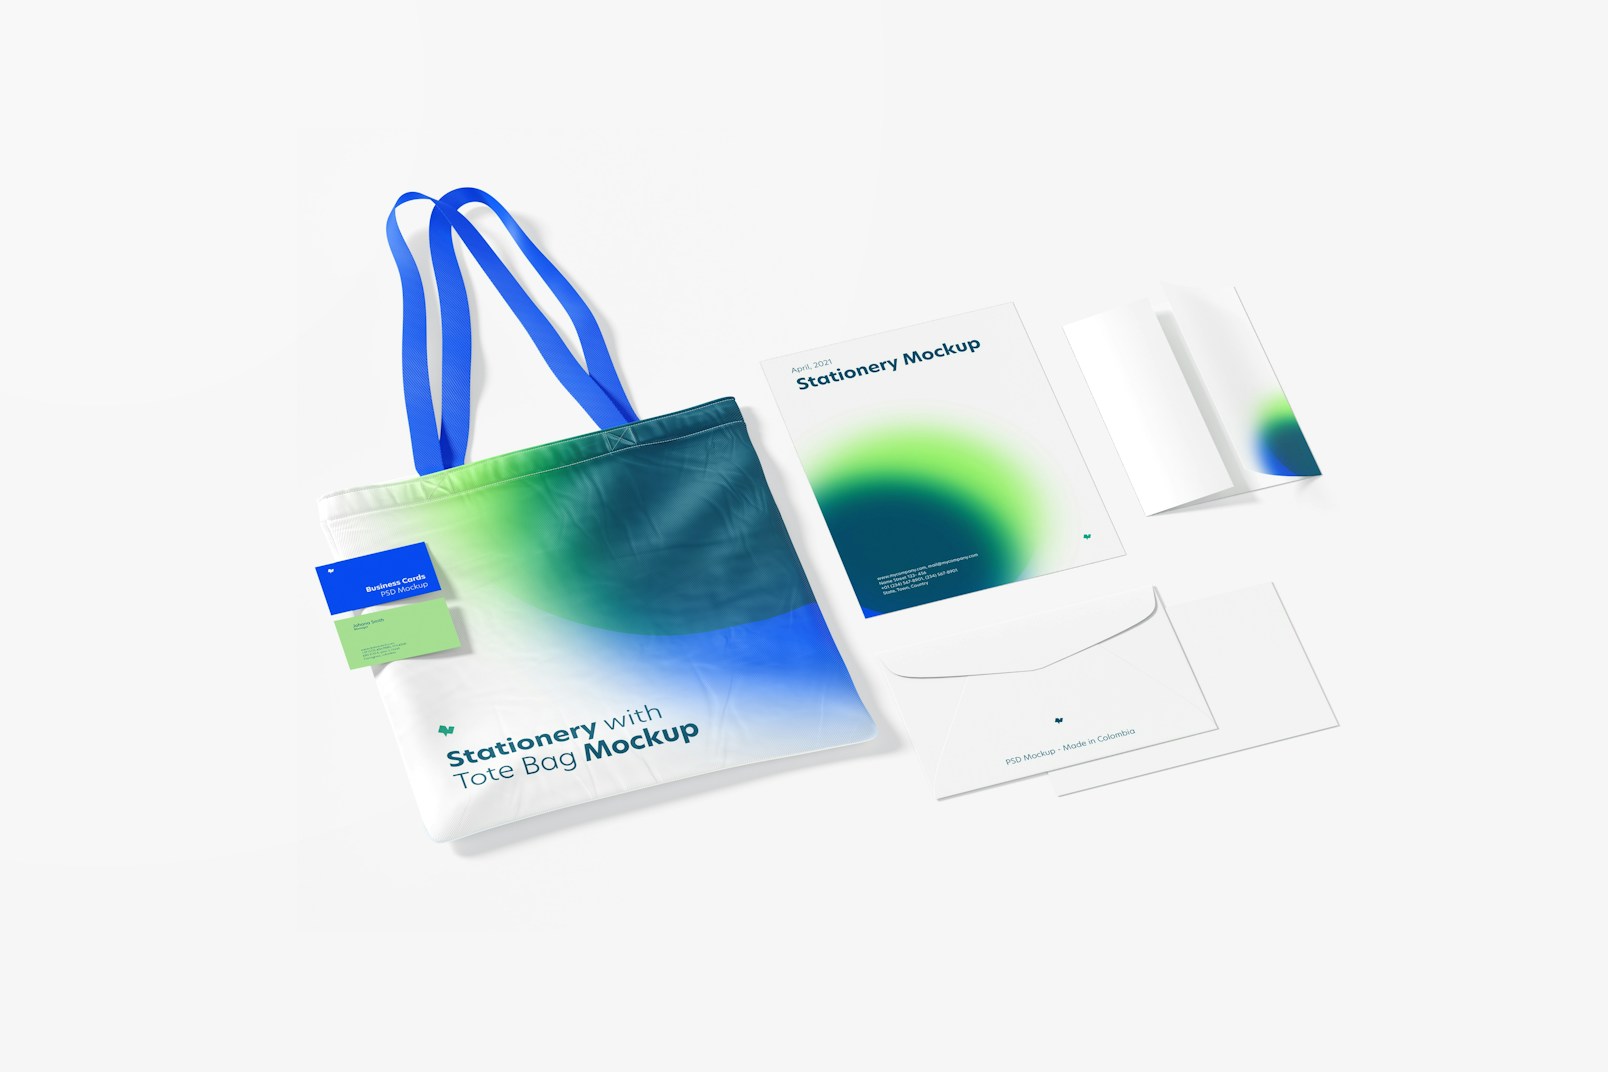 Stationery with Tote Bag Mockup